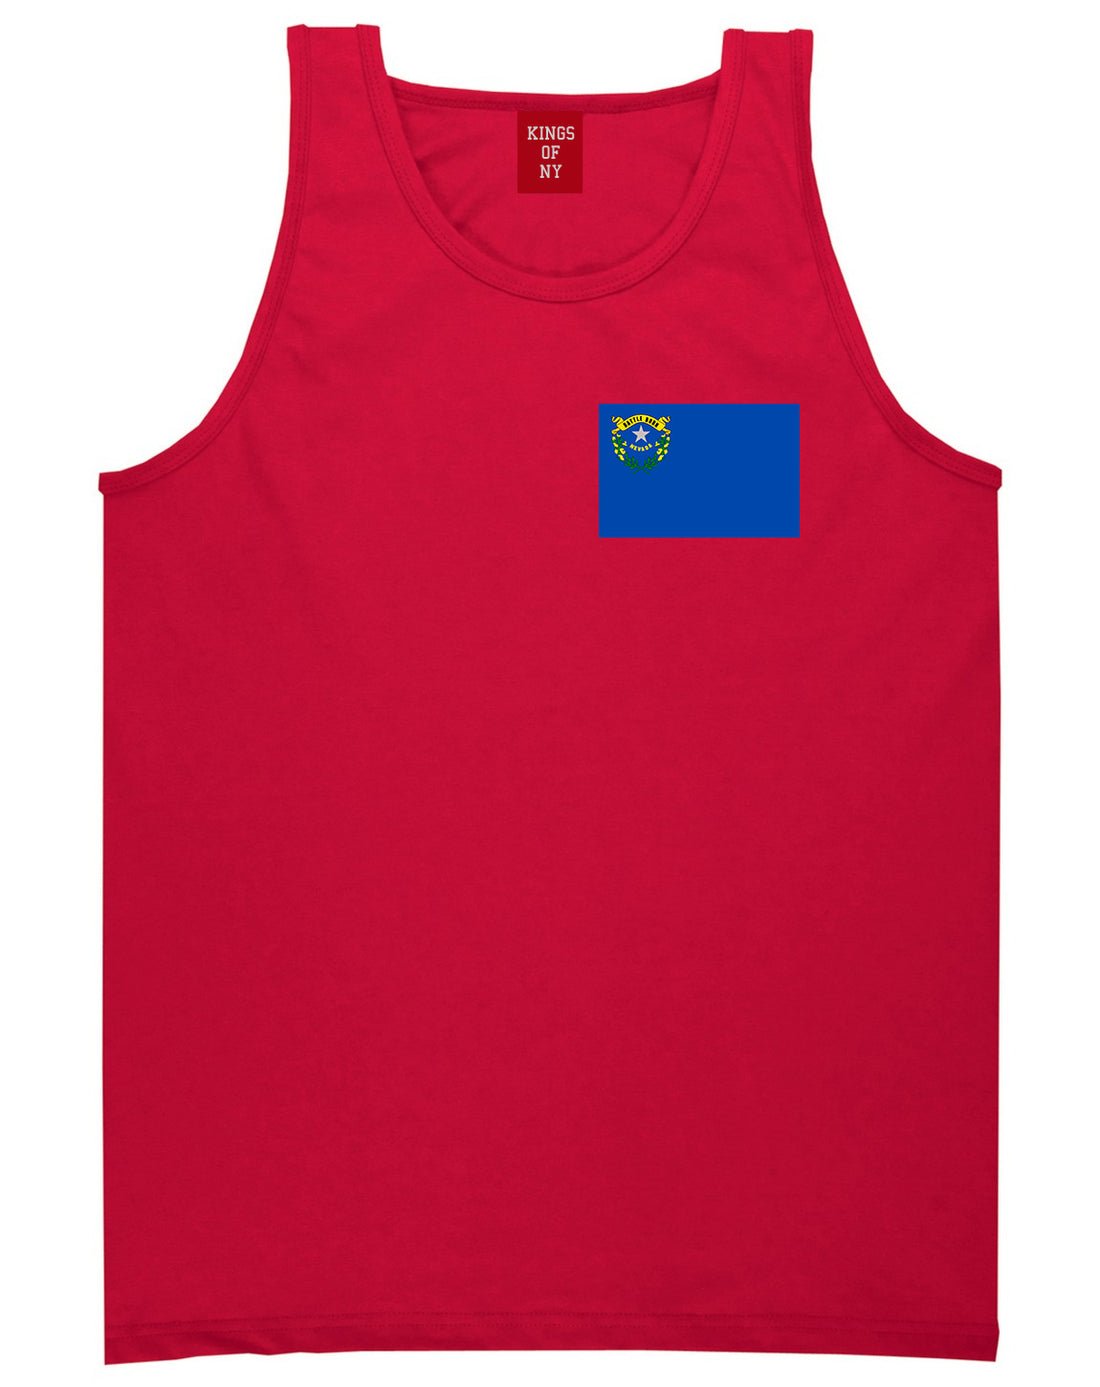 Nevada State Flag NV Chest Mens Tank Top T-Shirt Red